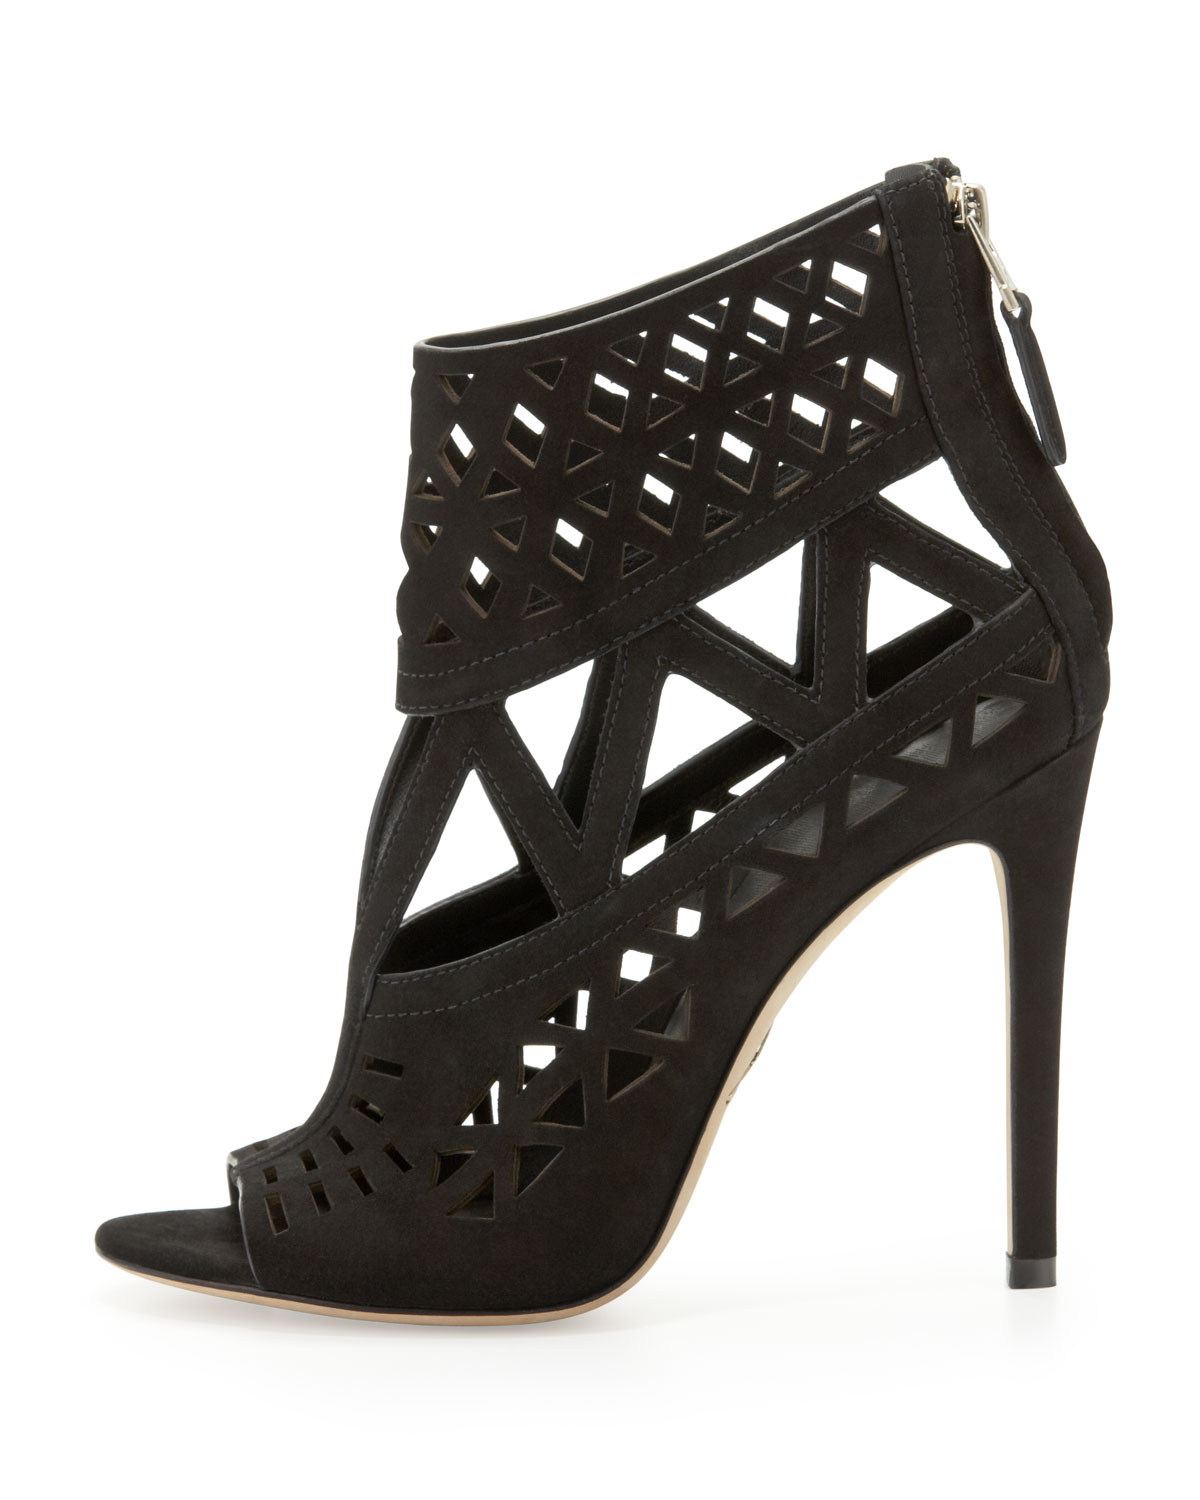 Lyst - B brian atwood Levens Suede Cutout Sandal in Black